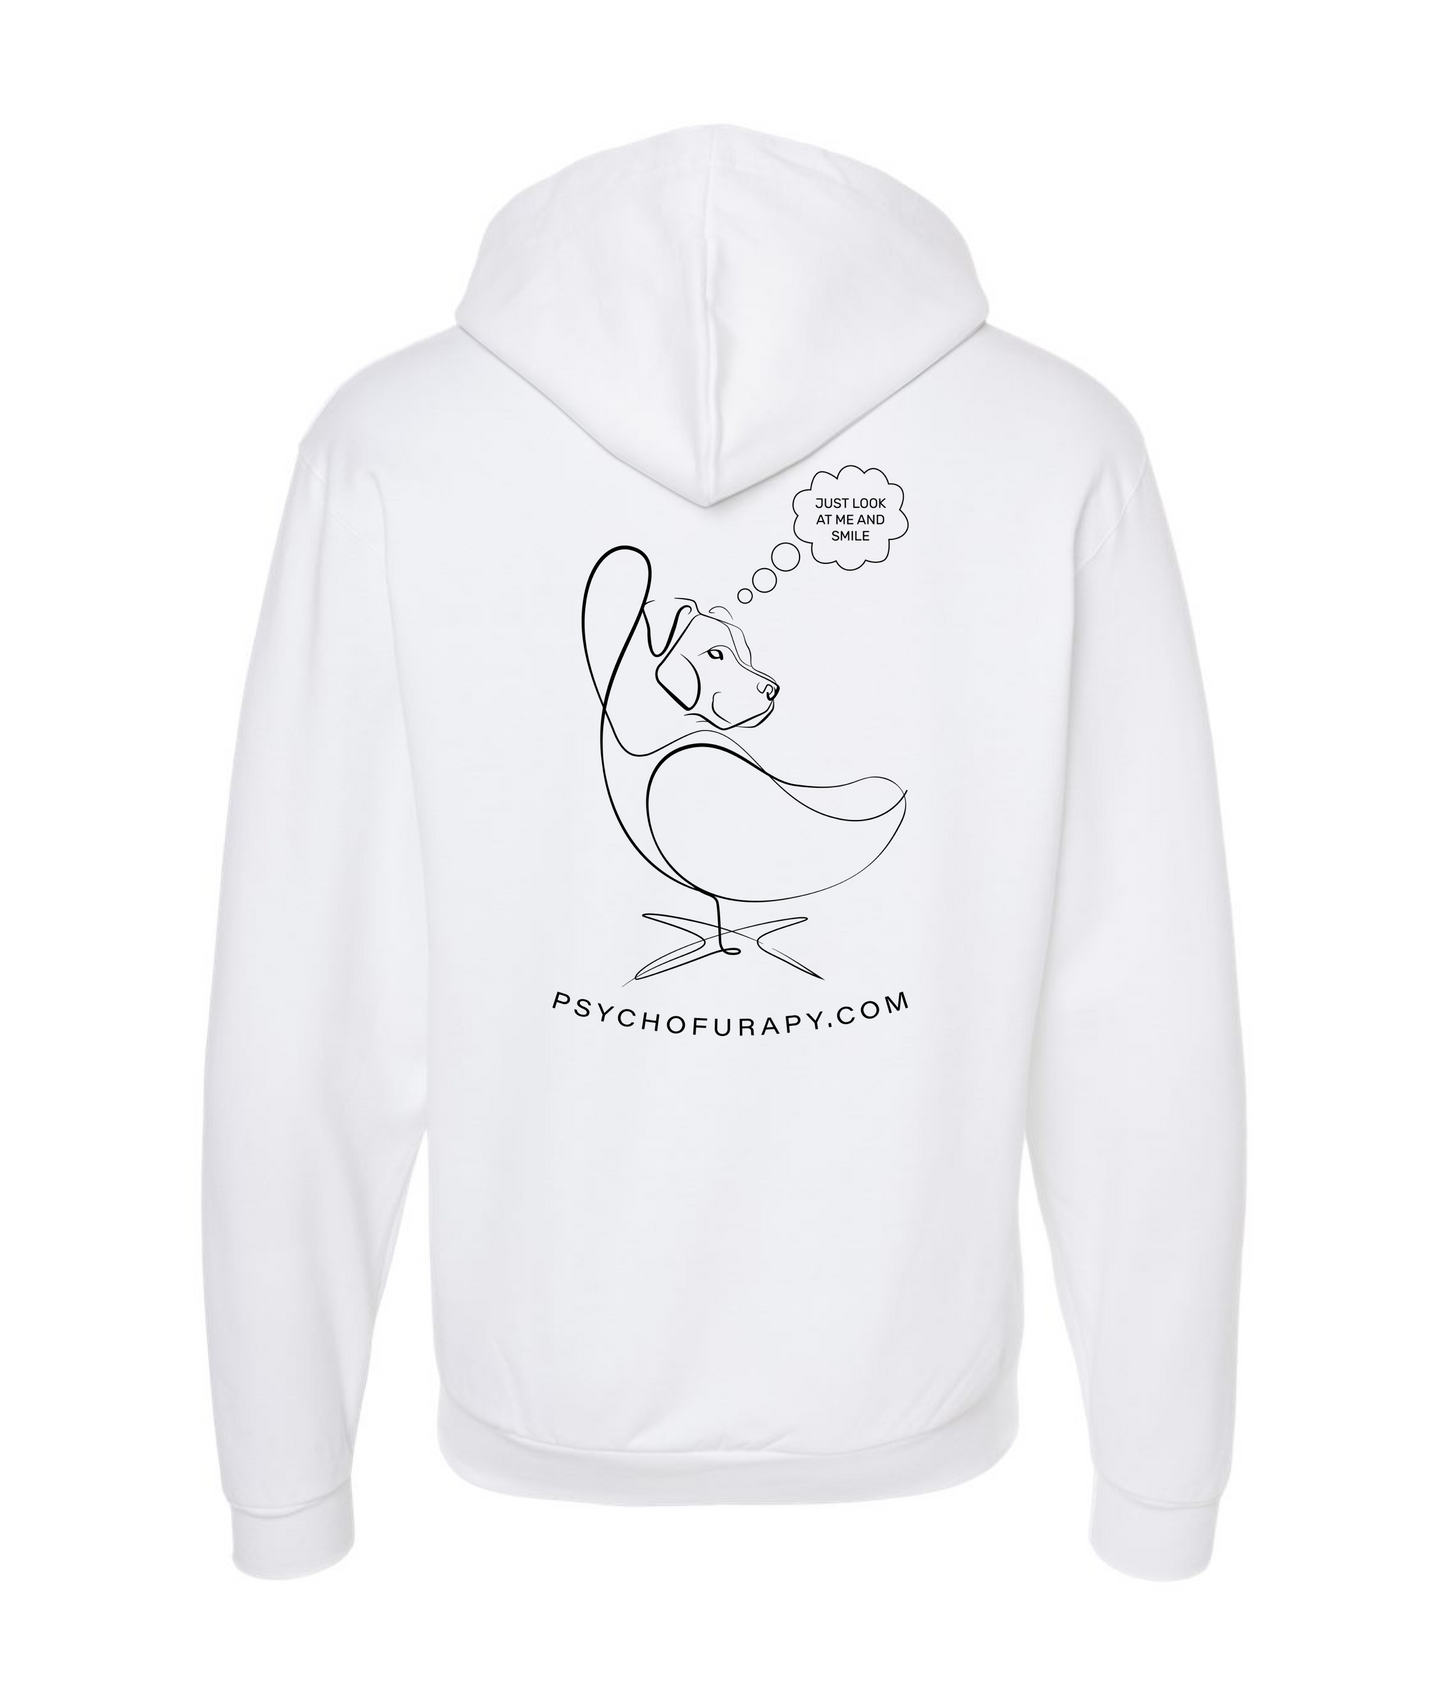 pyschofurapy.com - LOOK AND SMILE - White Zip Up Hoodie